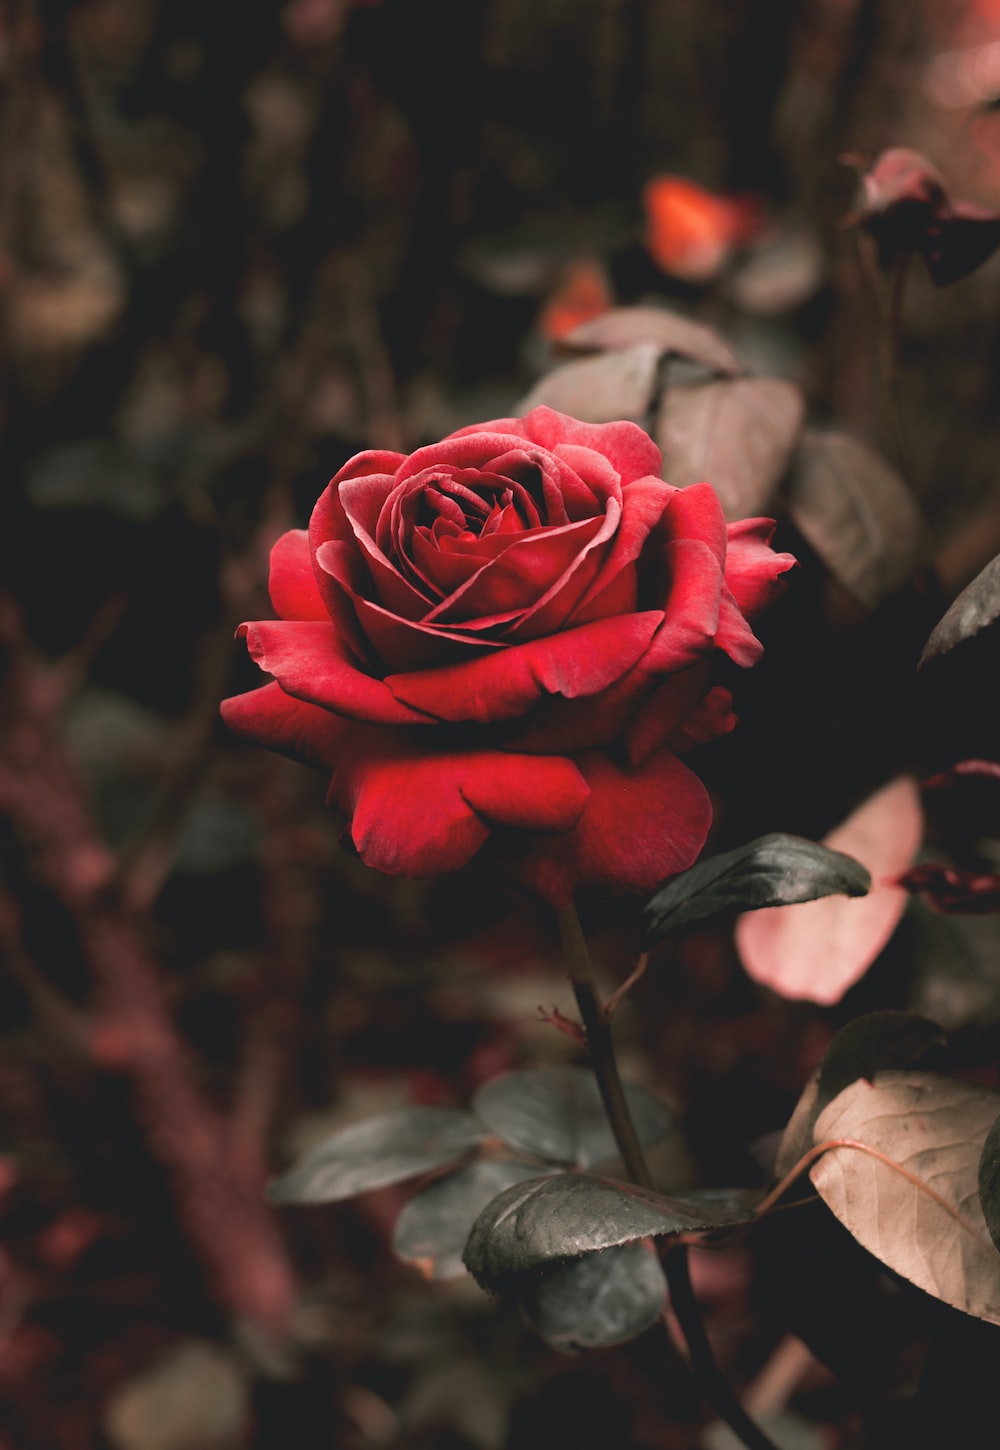 Beautiful Rose Picture. Download Free Image